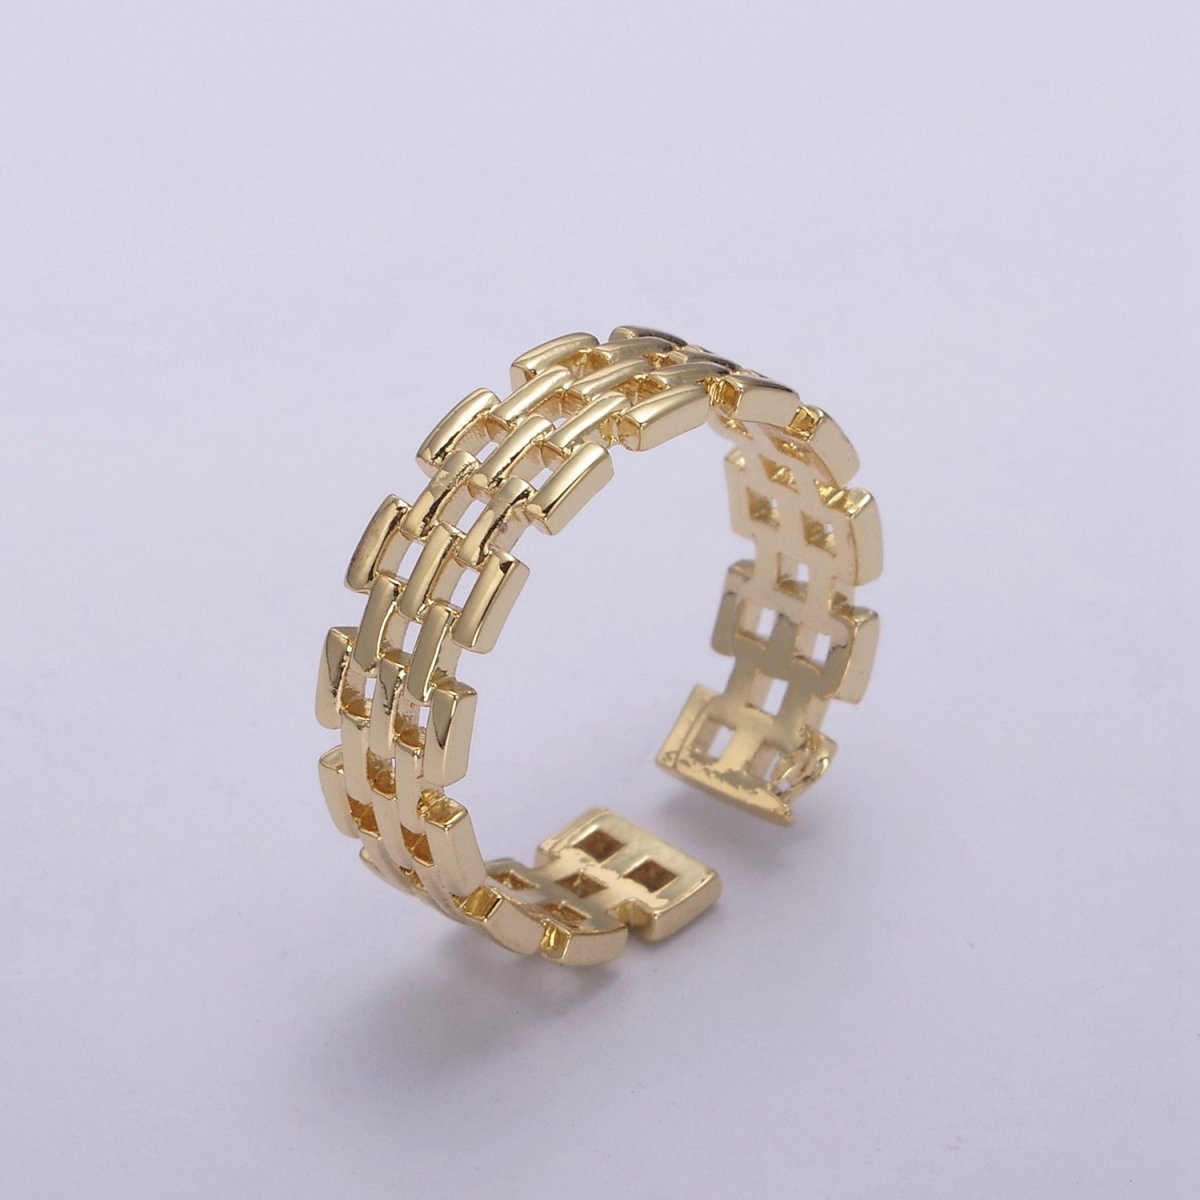 Gold Filled Panther Link Ring Open Adjustable Jewelry for Stackable Minimalist Jewelry U-259 - DLUXCA